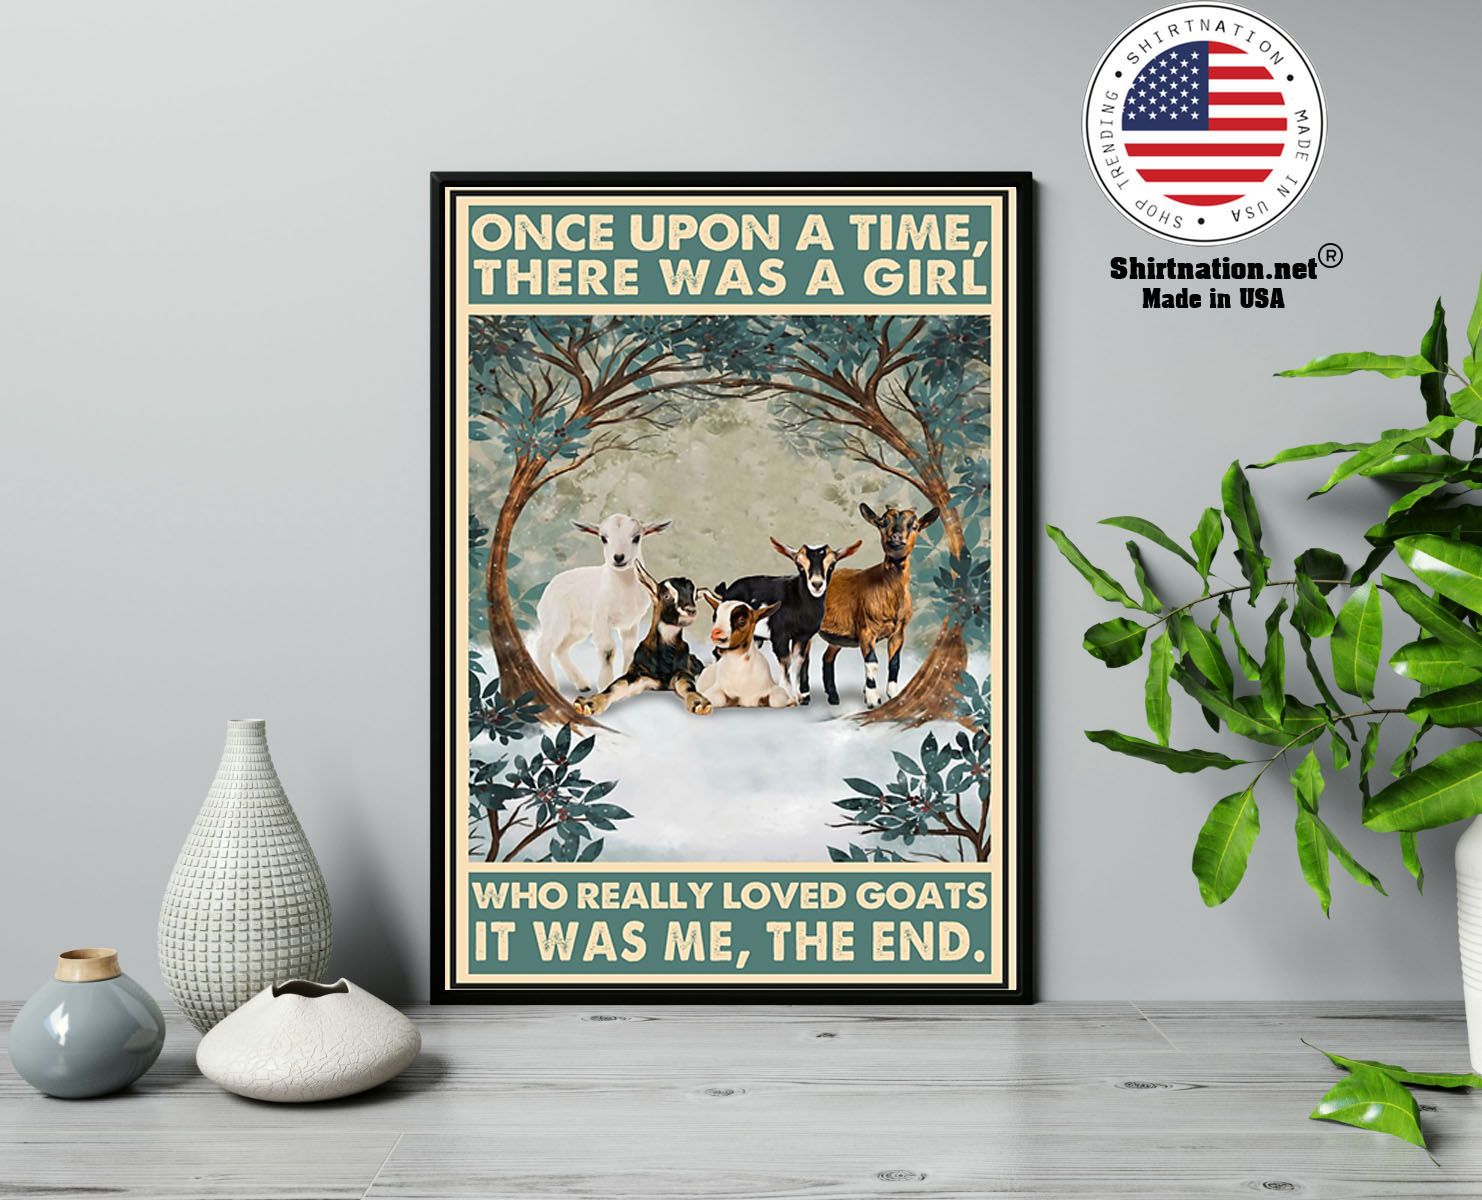 Once upon a time there was a girl who really loved goats poster 2